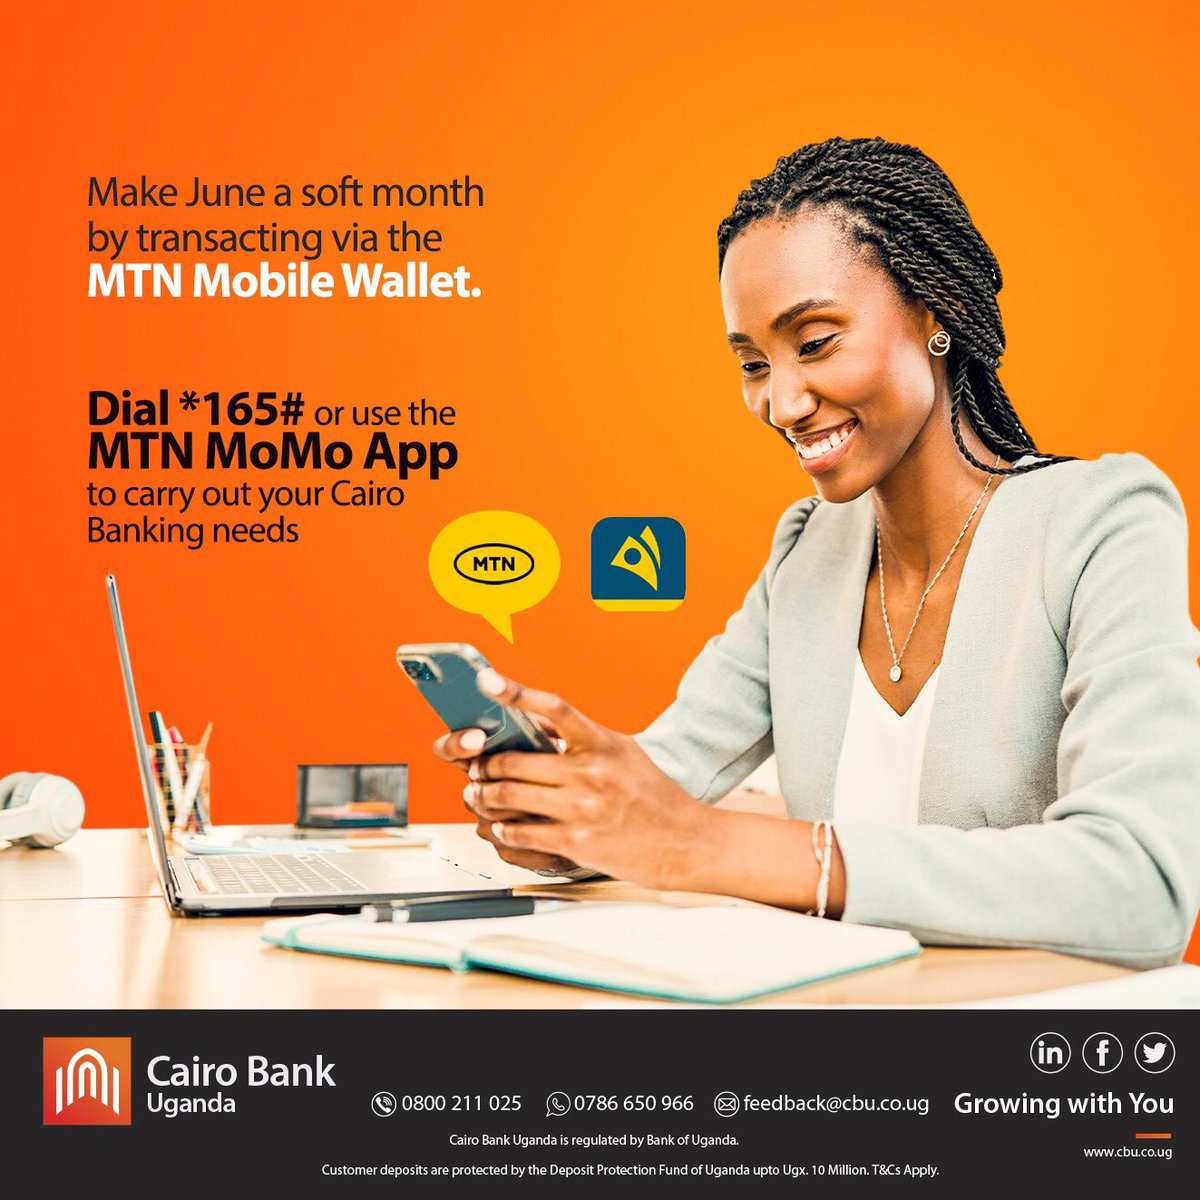 June should be a soft month! Avoid transaction woes by taking the shortcut with the MTN Mobile Wallet today.

Dial *165# or use the MTN MoMo App for your Cairo Banking needs.

#CairoBank #MTNMobileWallet #MTNMoMo #MoneyTalks #WednesdayMotivation